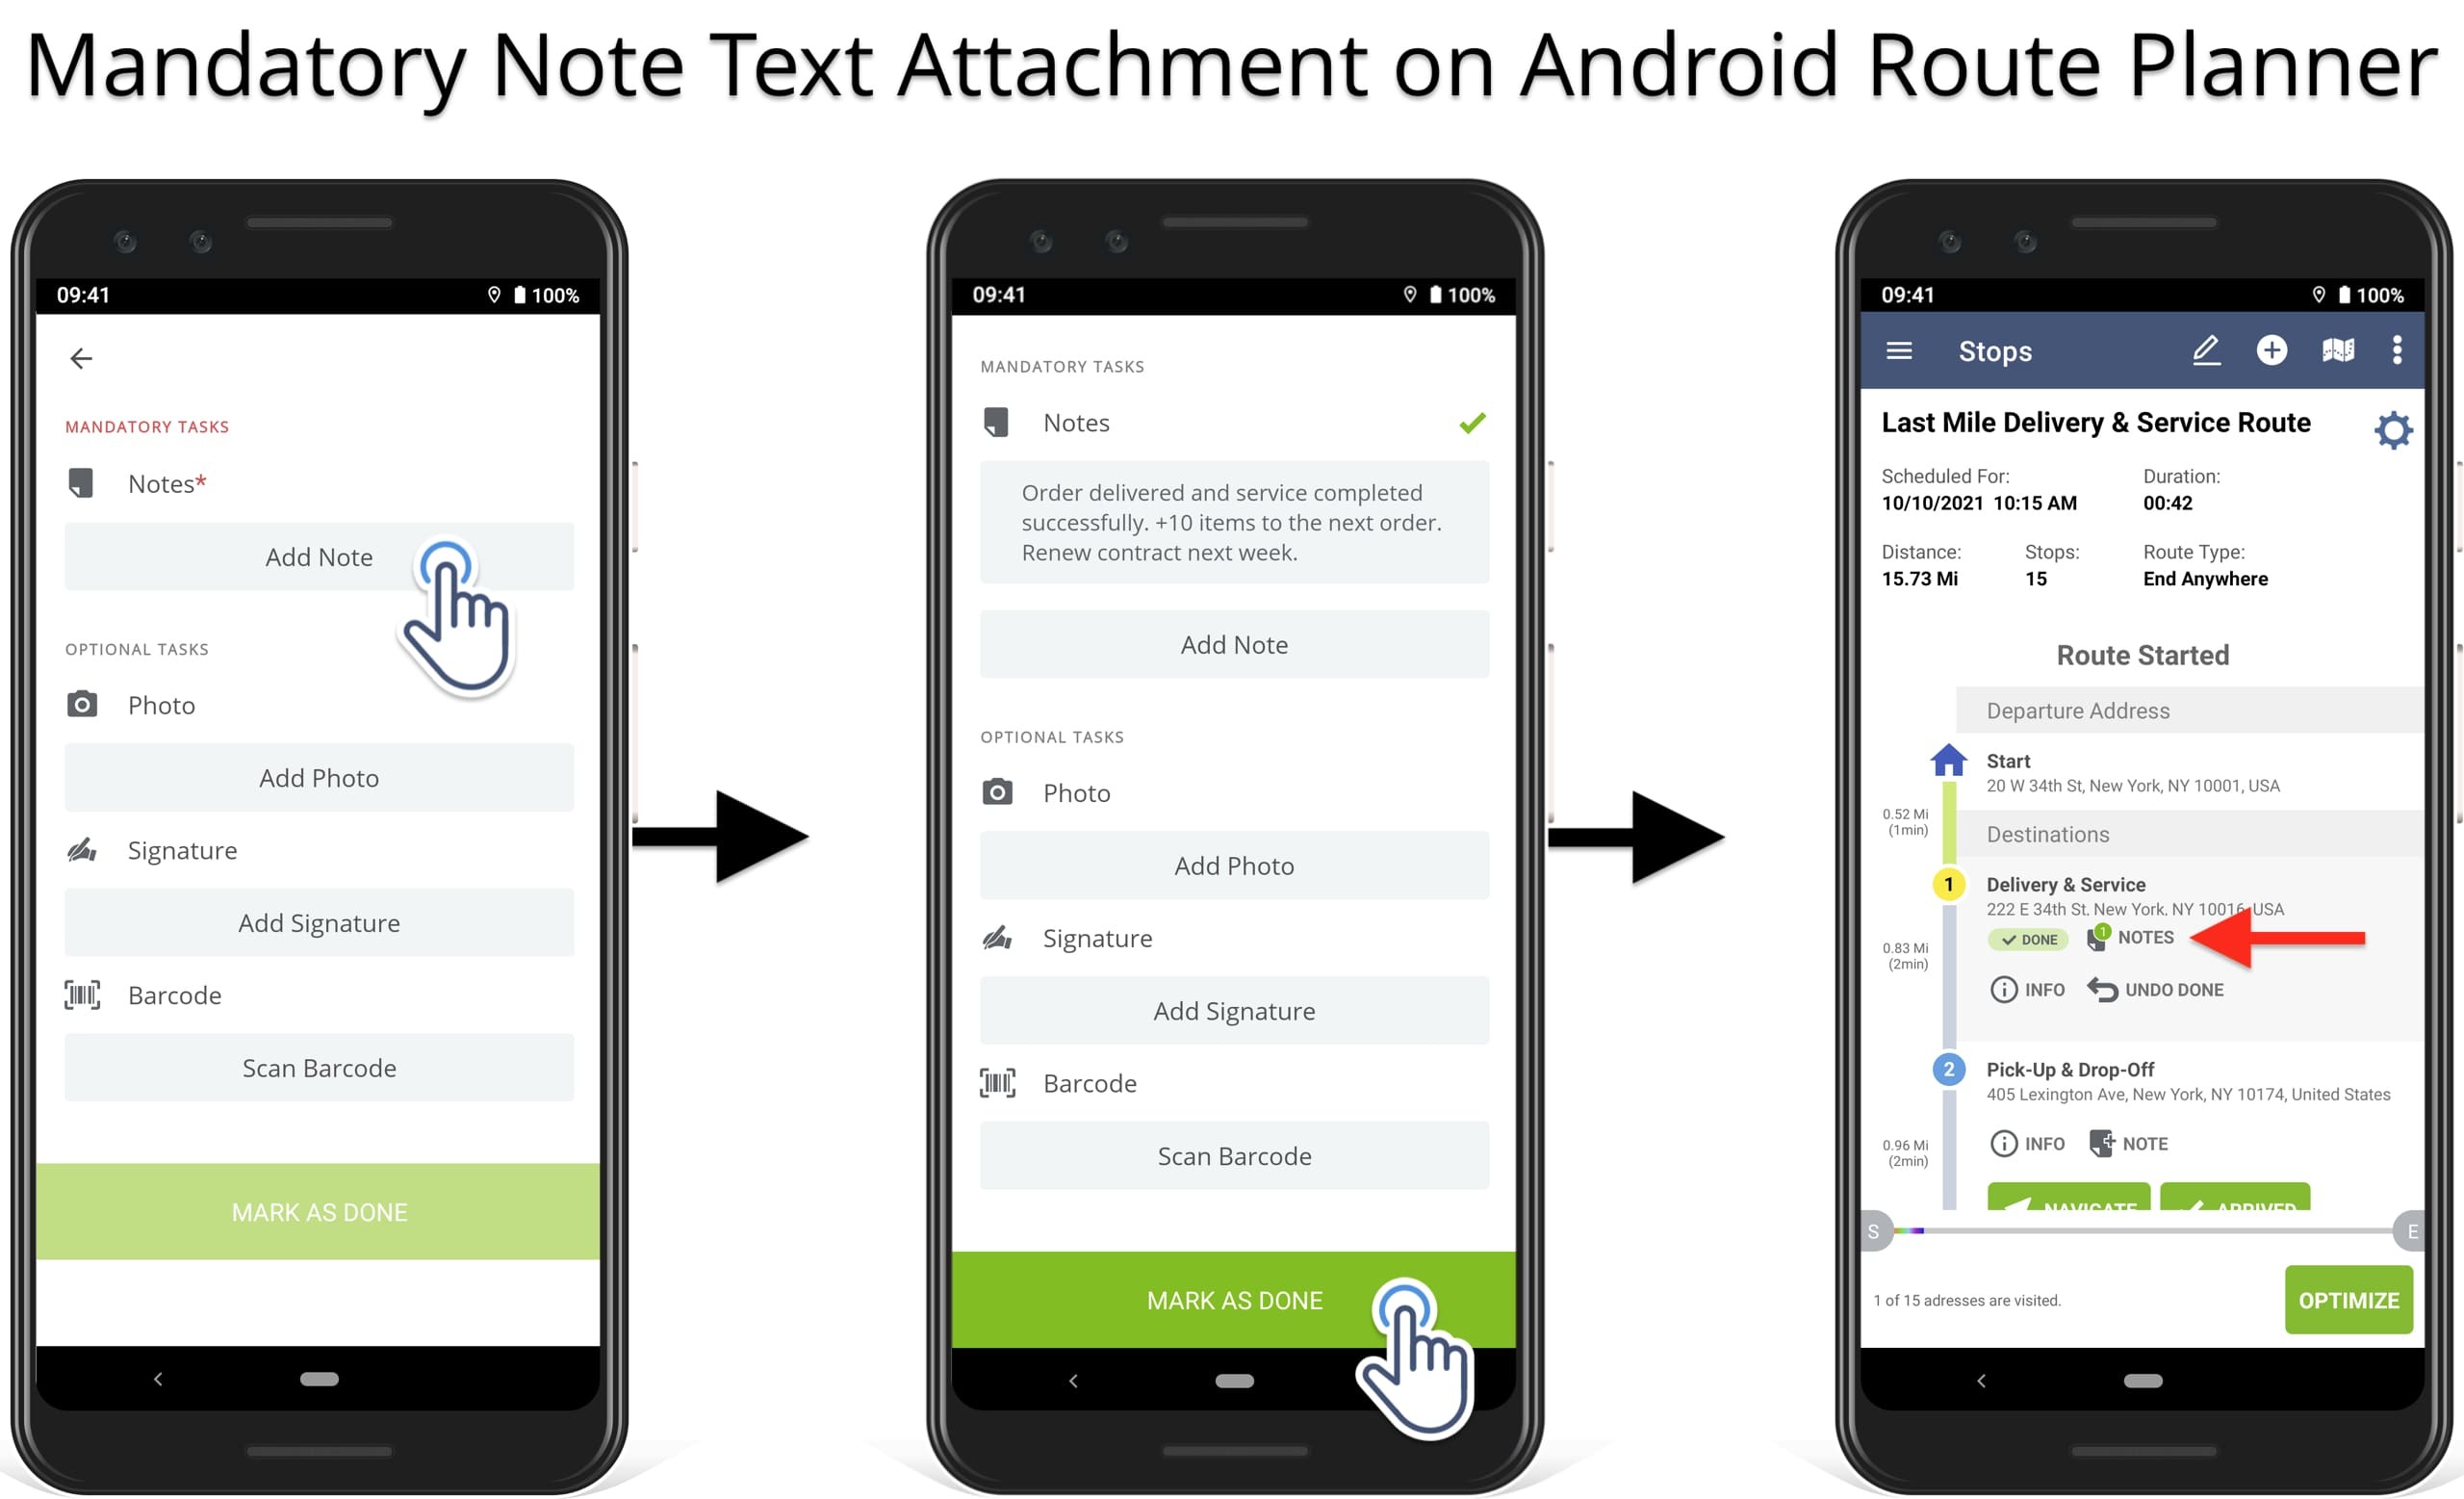 Add mandatory note text attachment to route stops to complete orders on Android Route Planner.